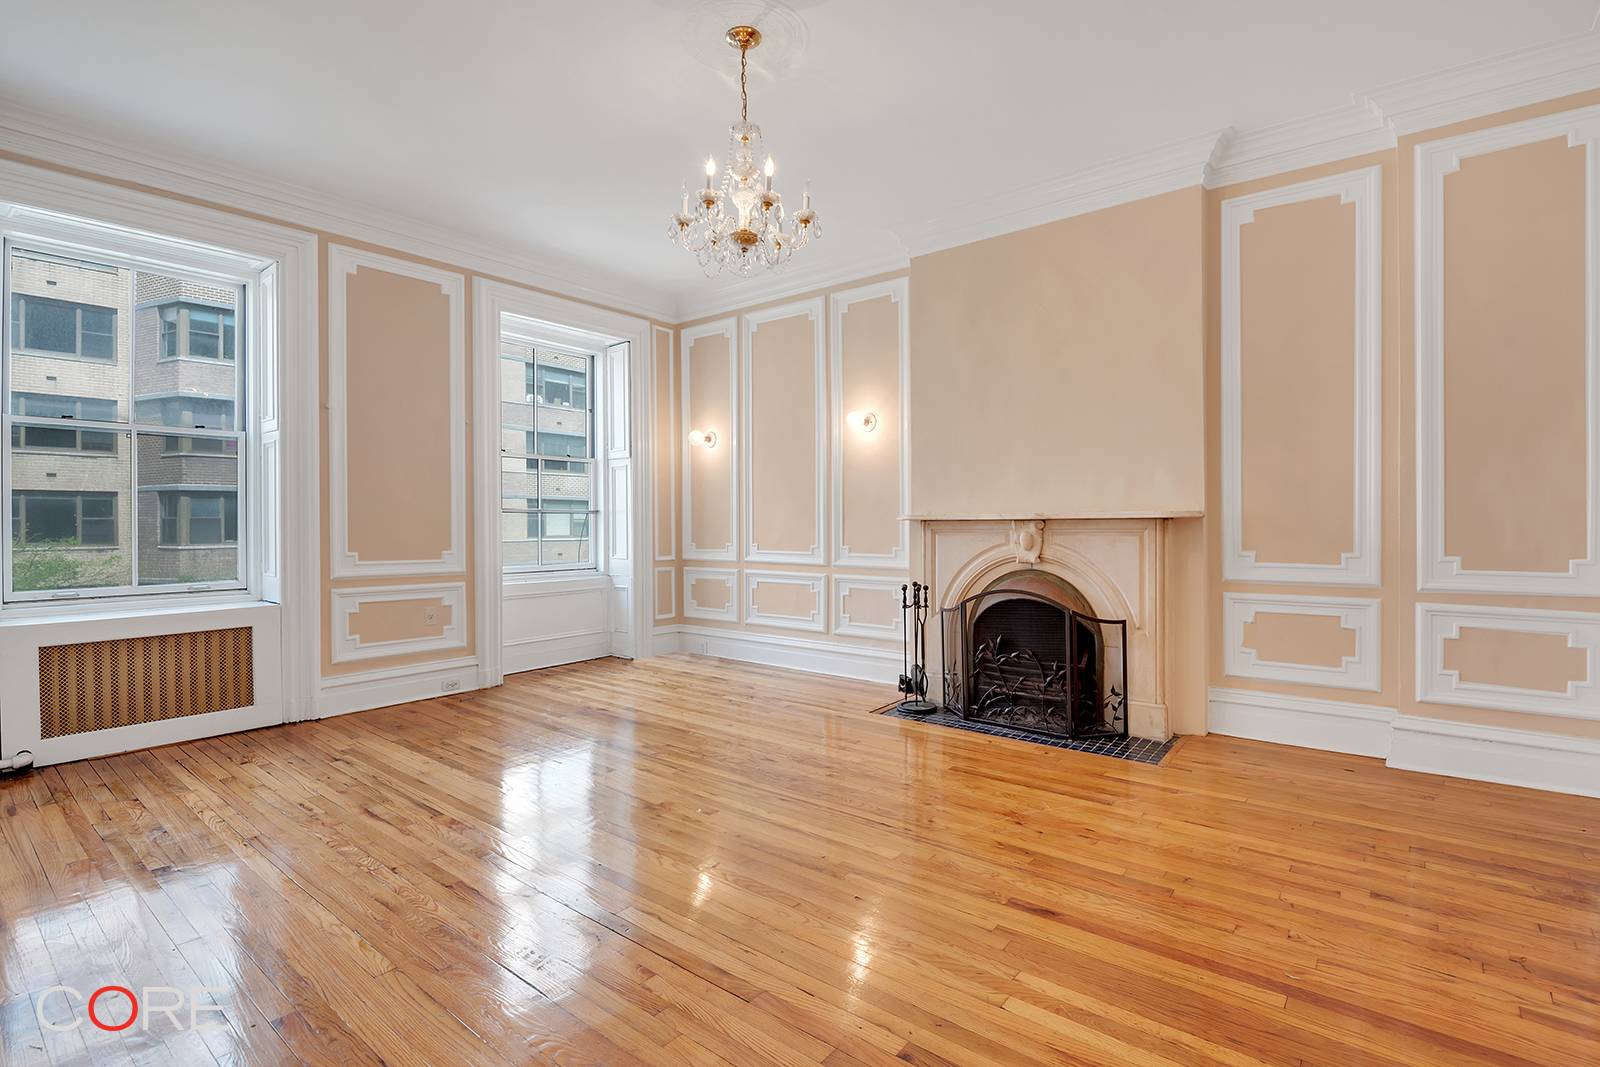 Move right into this fully renovated one bedroom apartment located in Midtown South's Murray Hill district, in a historic townhouse that captures the essence of world class living.